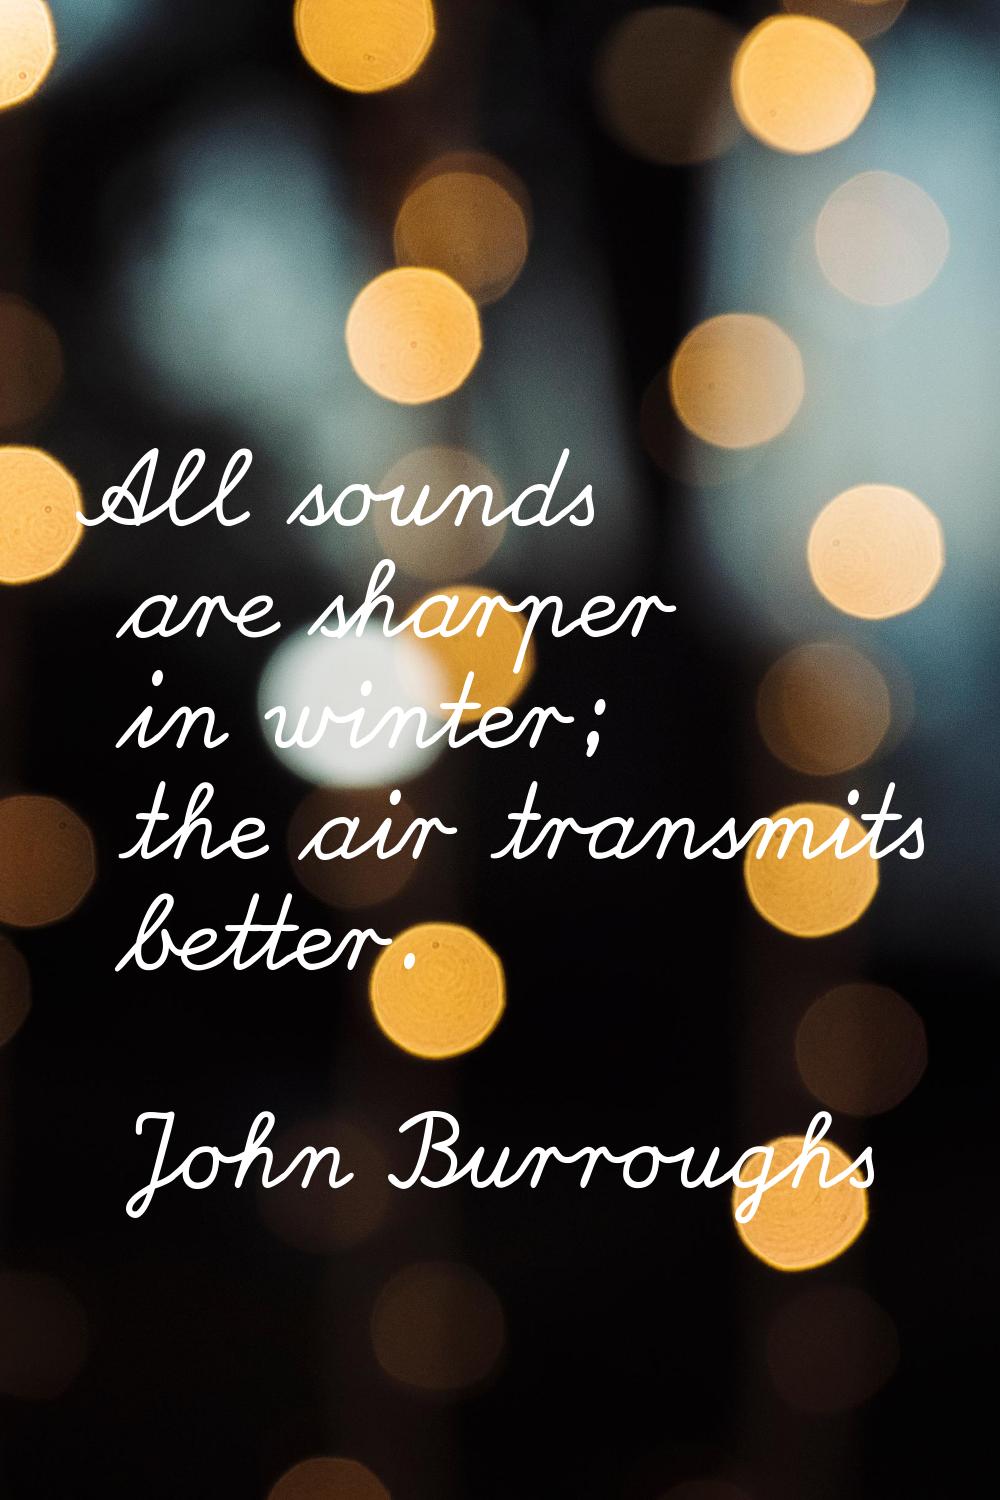 All sounds are sharper in winter; the air transmits better.